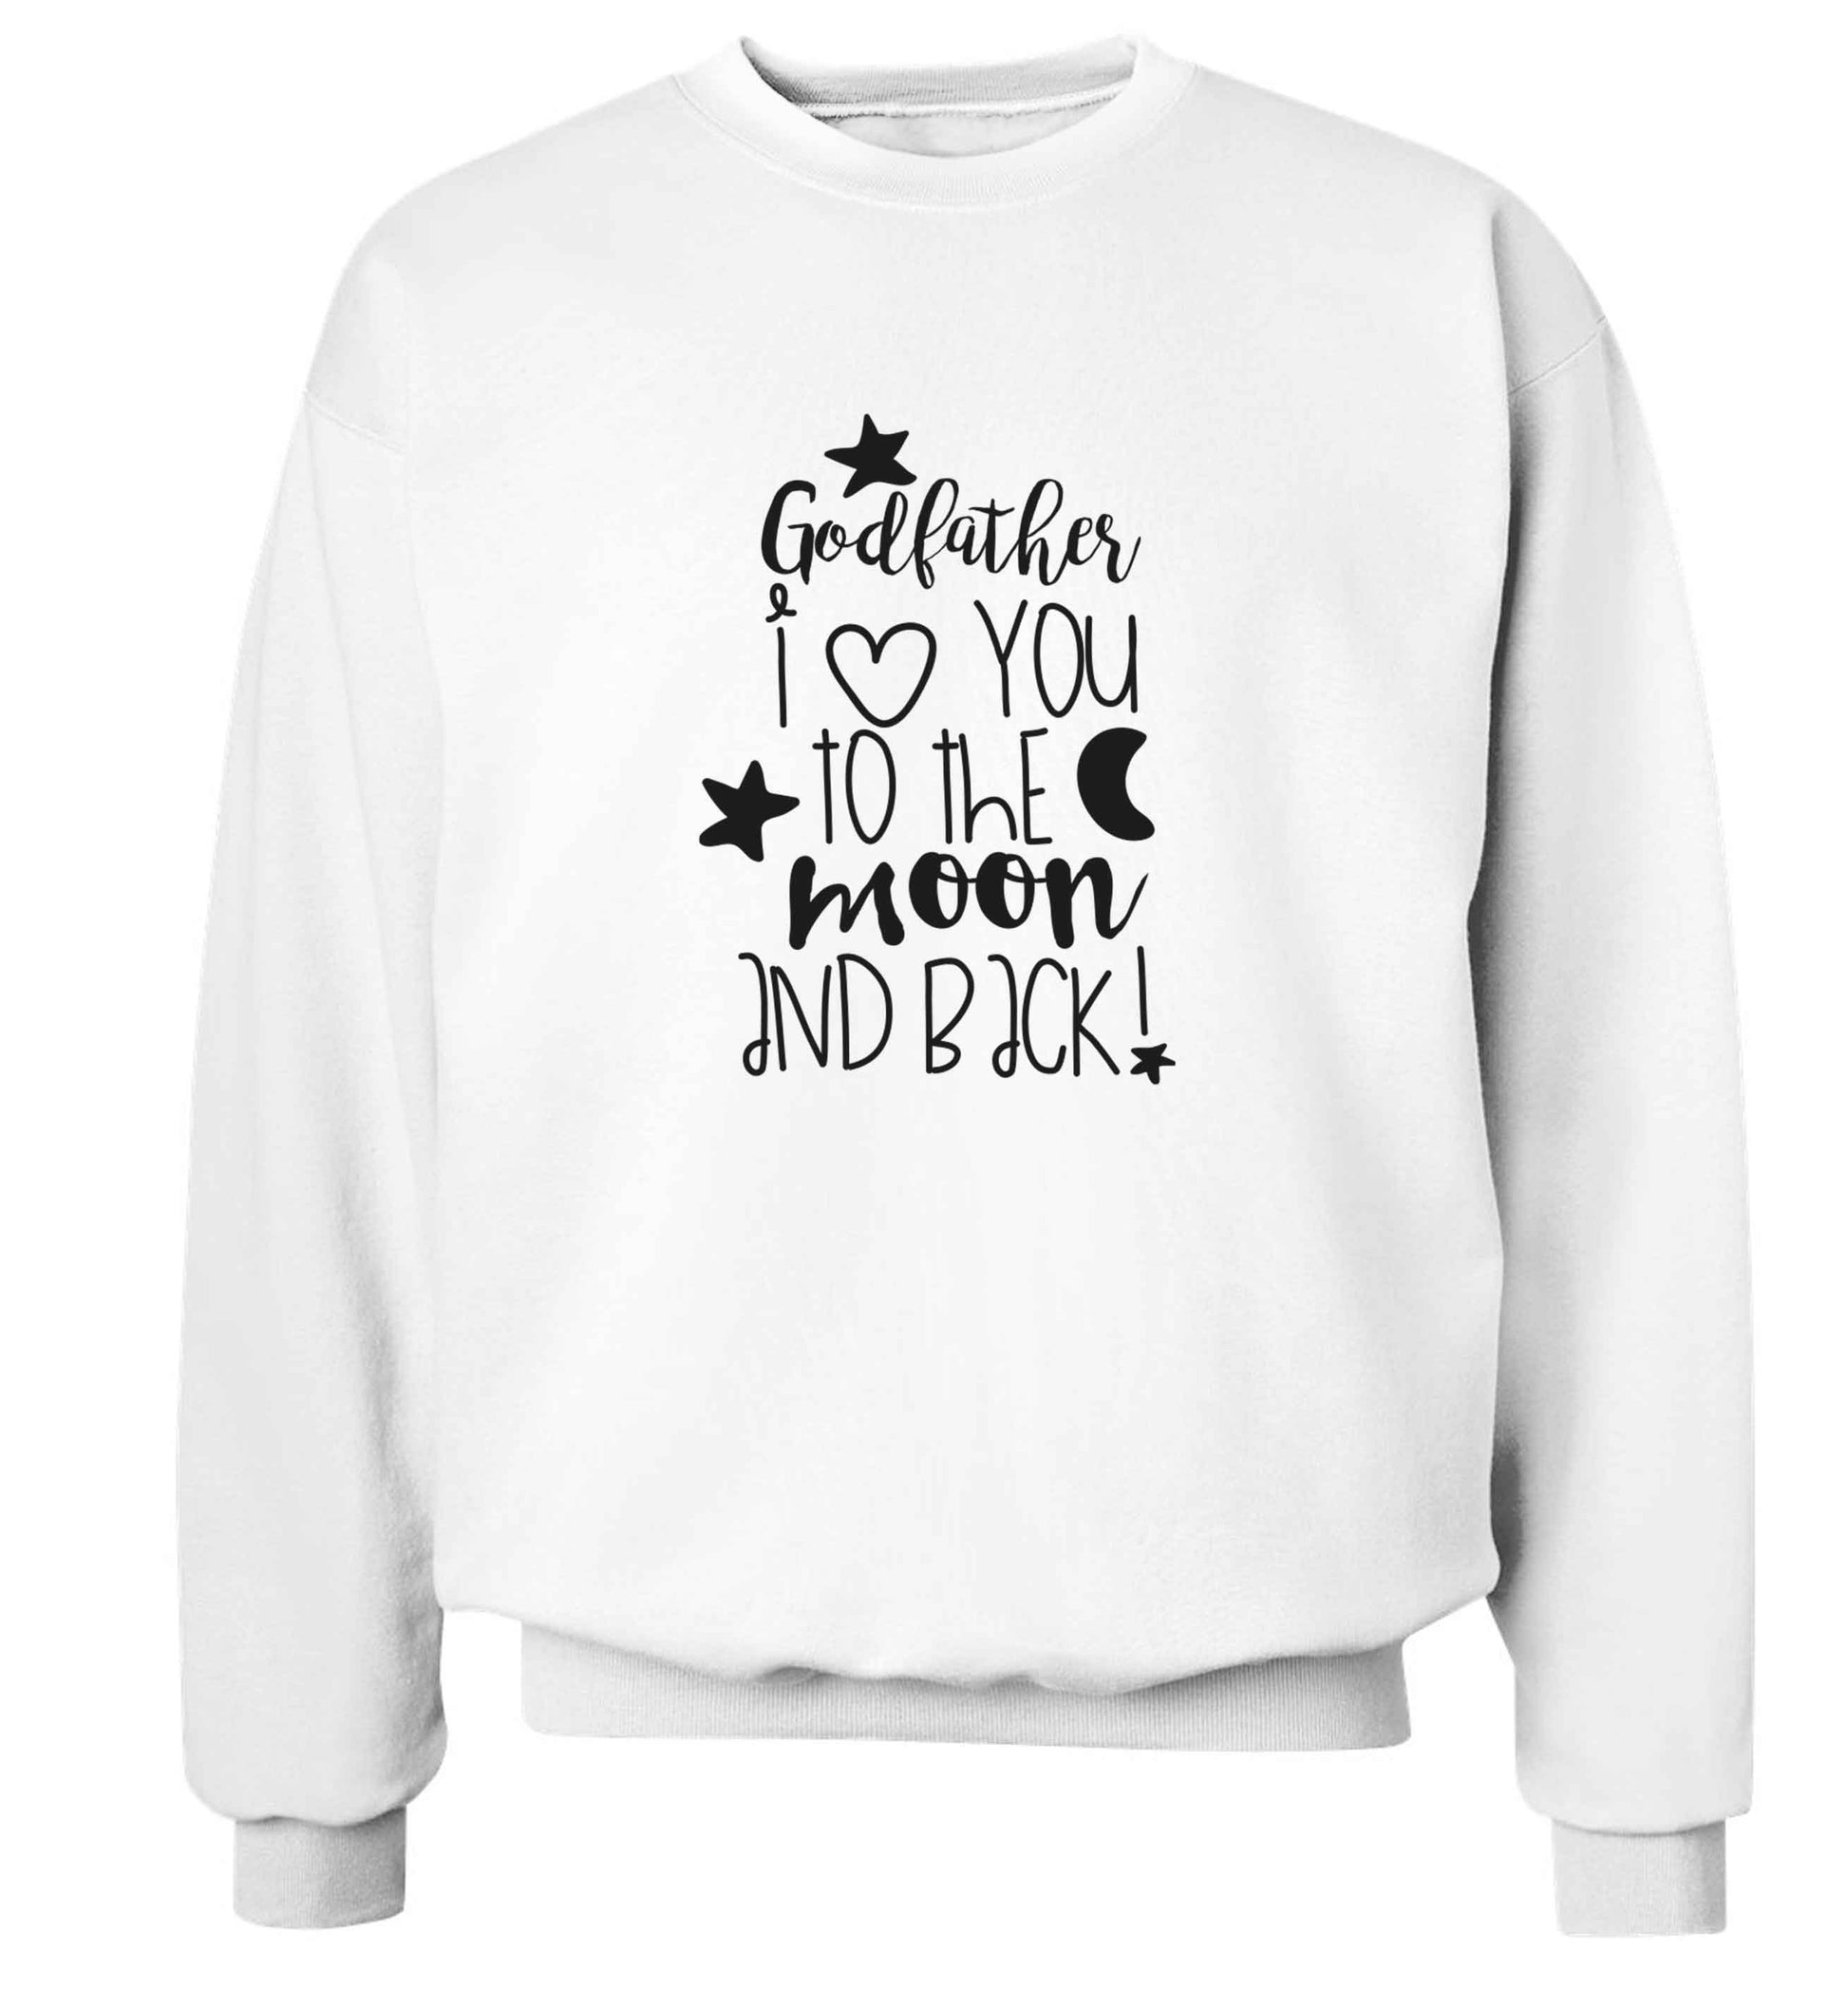 Godfather I love you to the moon and back adult's unisex white sweater 2XL